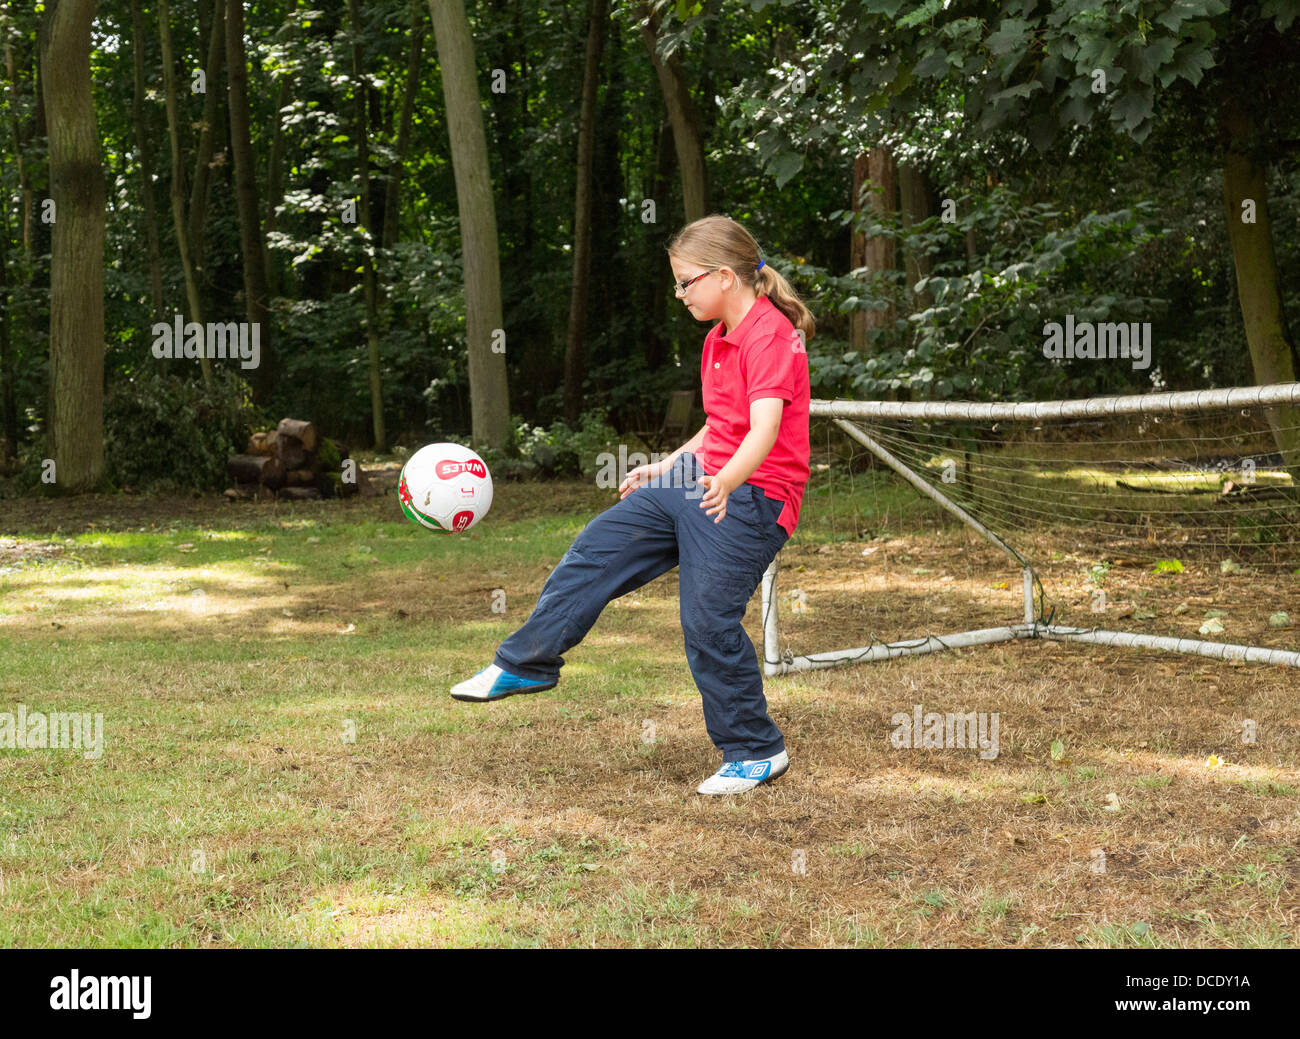 young girl kicking a soccer ball around in back yard Stock Photo